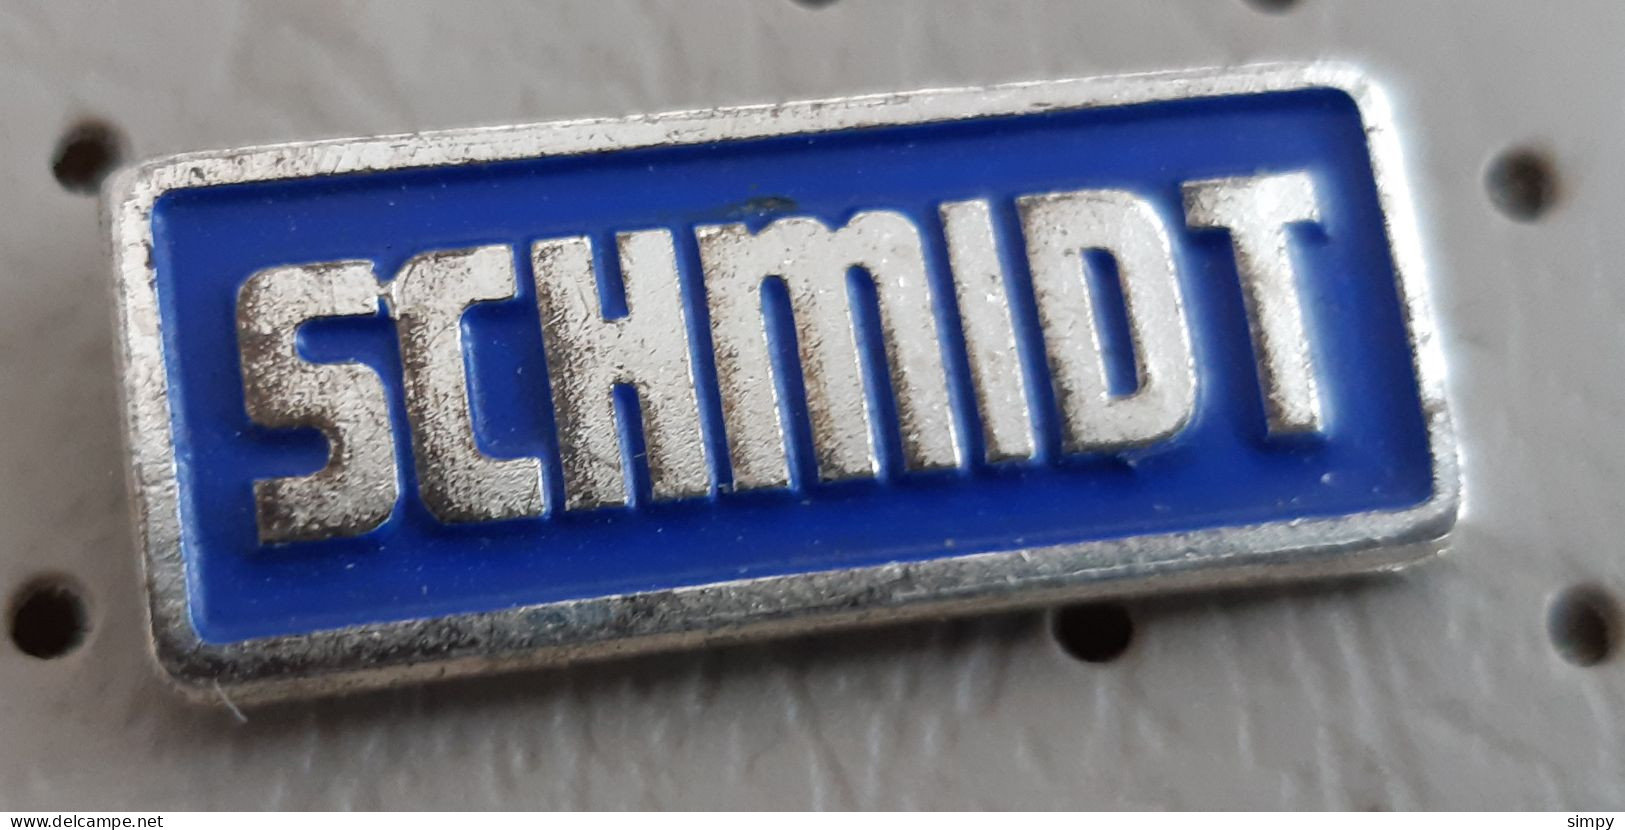 SCHMIDT Cleaning Truck Producer Automotive  Germany Vintage Pin - Markennamen